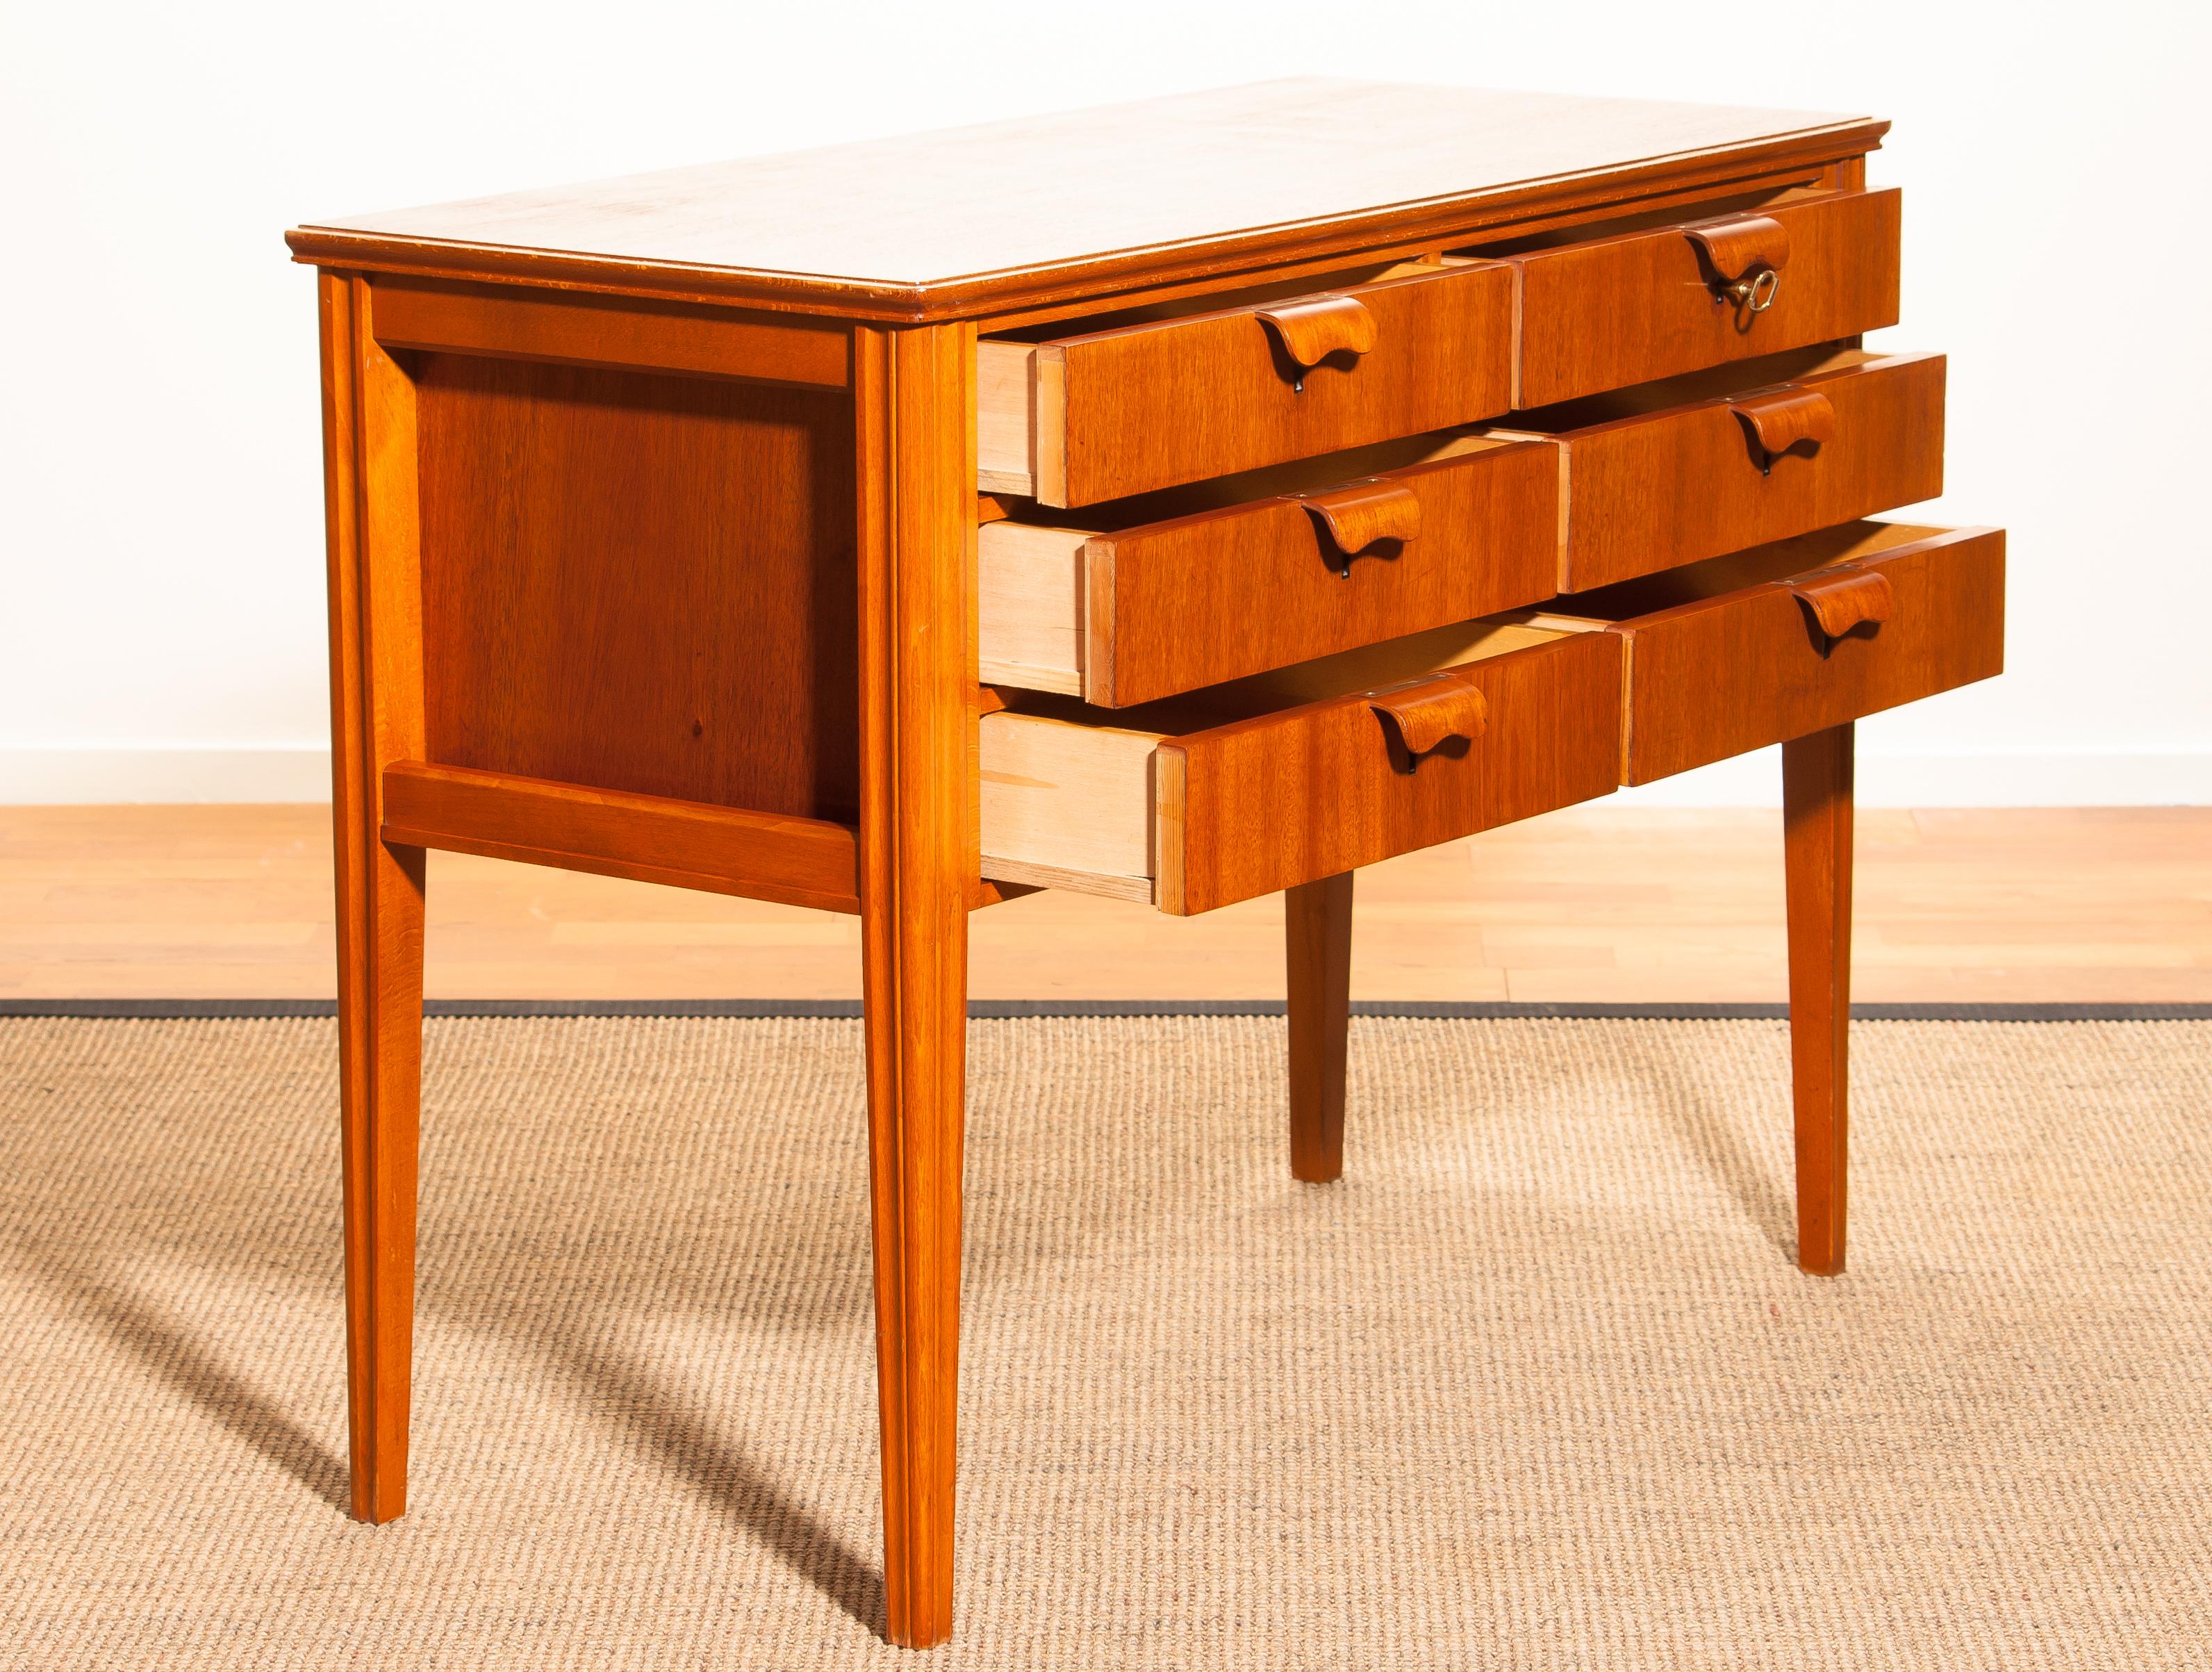 1950s, Teak and Beech Chest of Drawers by Ferdinand Lundquist 3